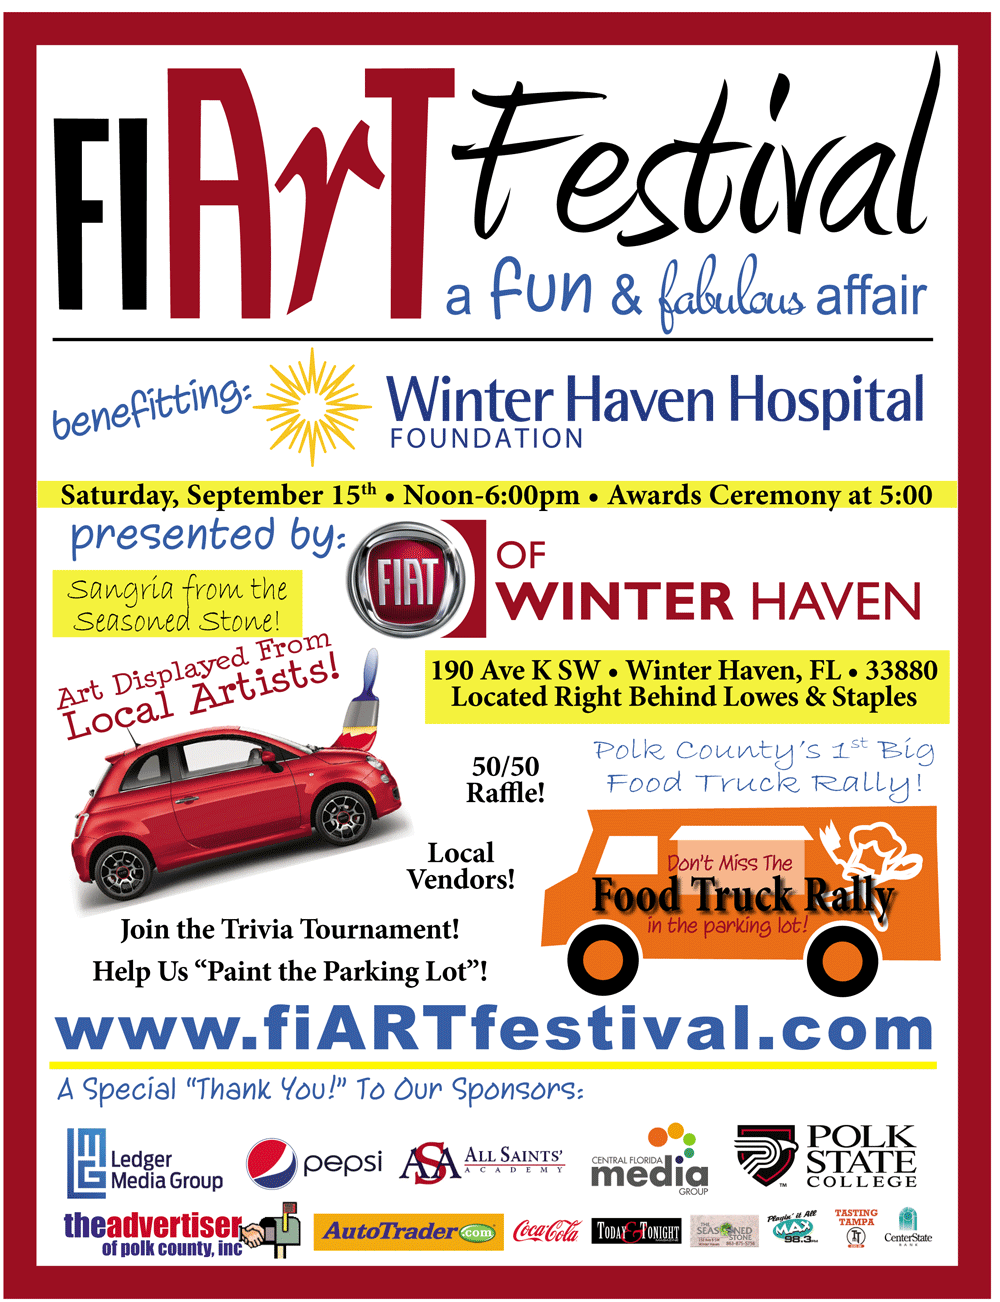 Winter Haven Food Truck Rally and FiArt Festival